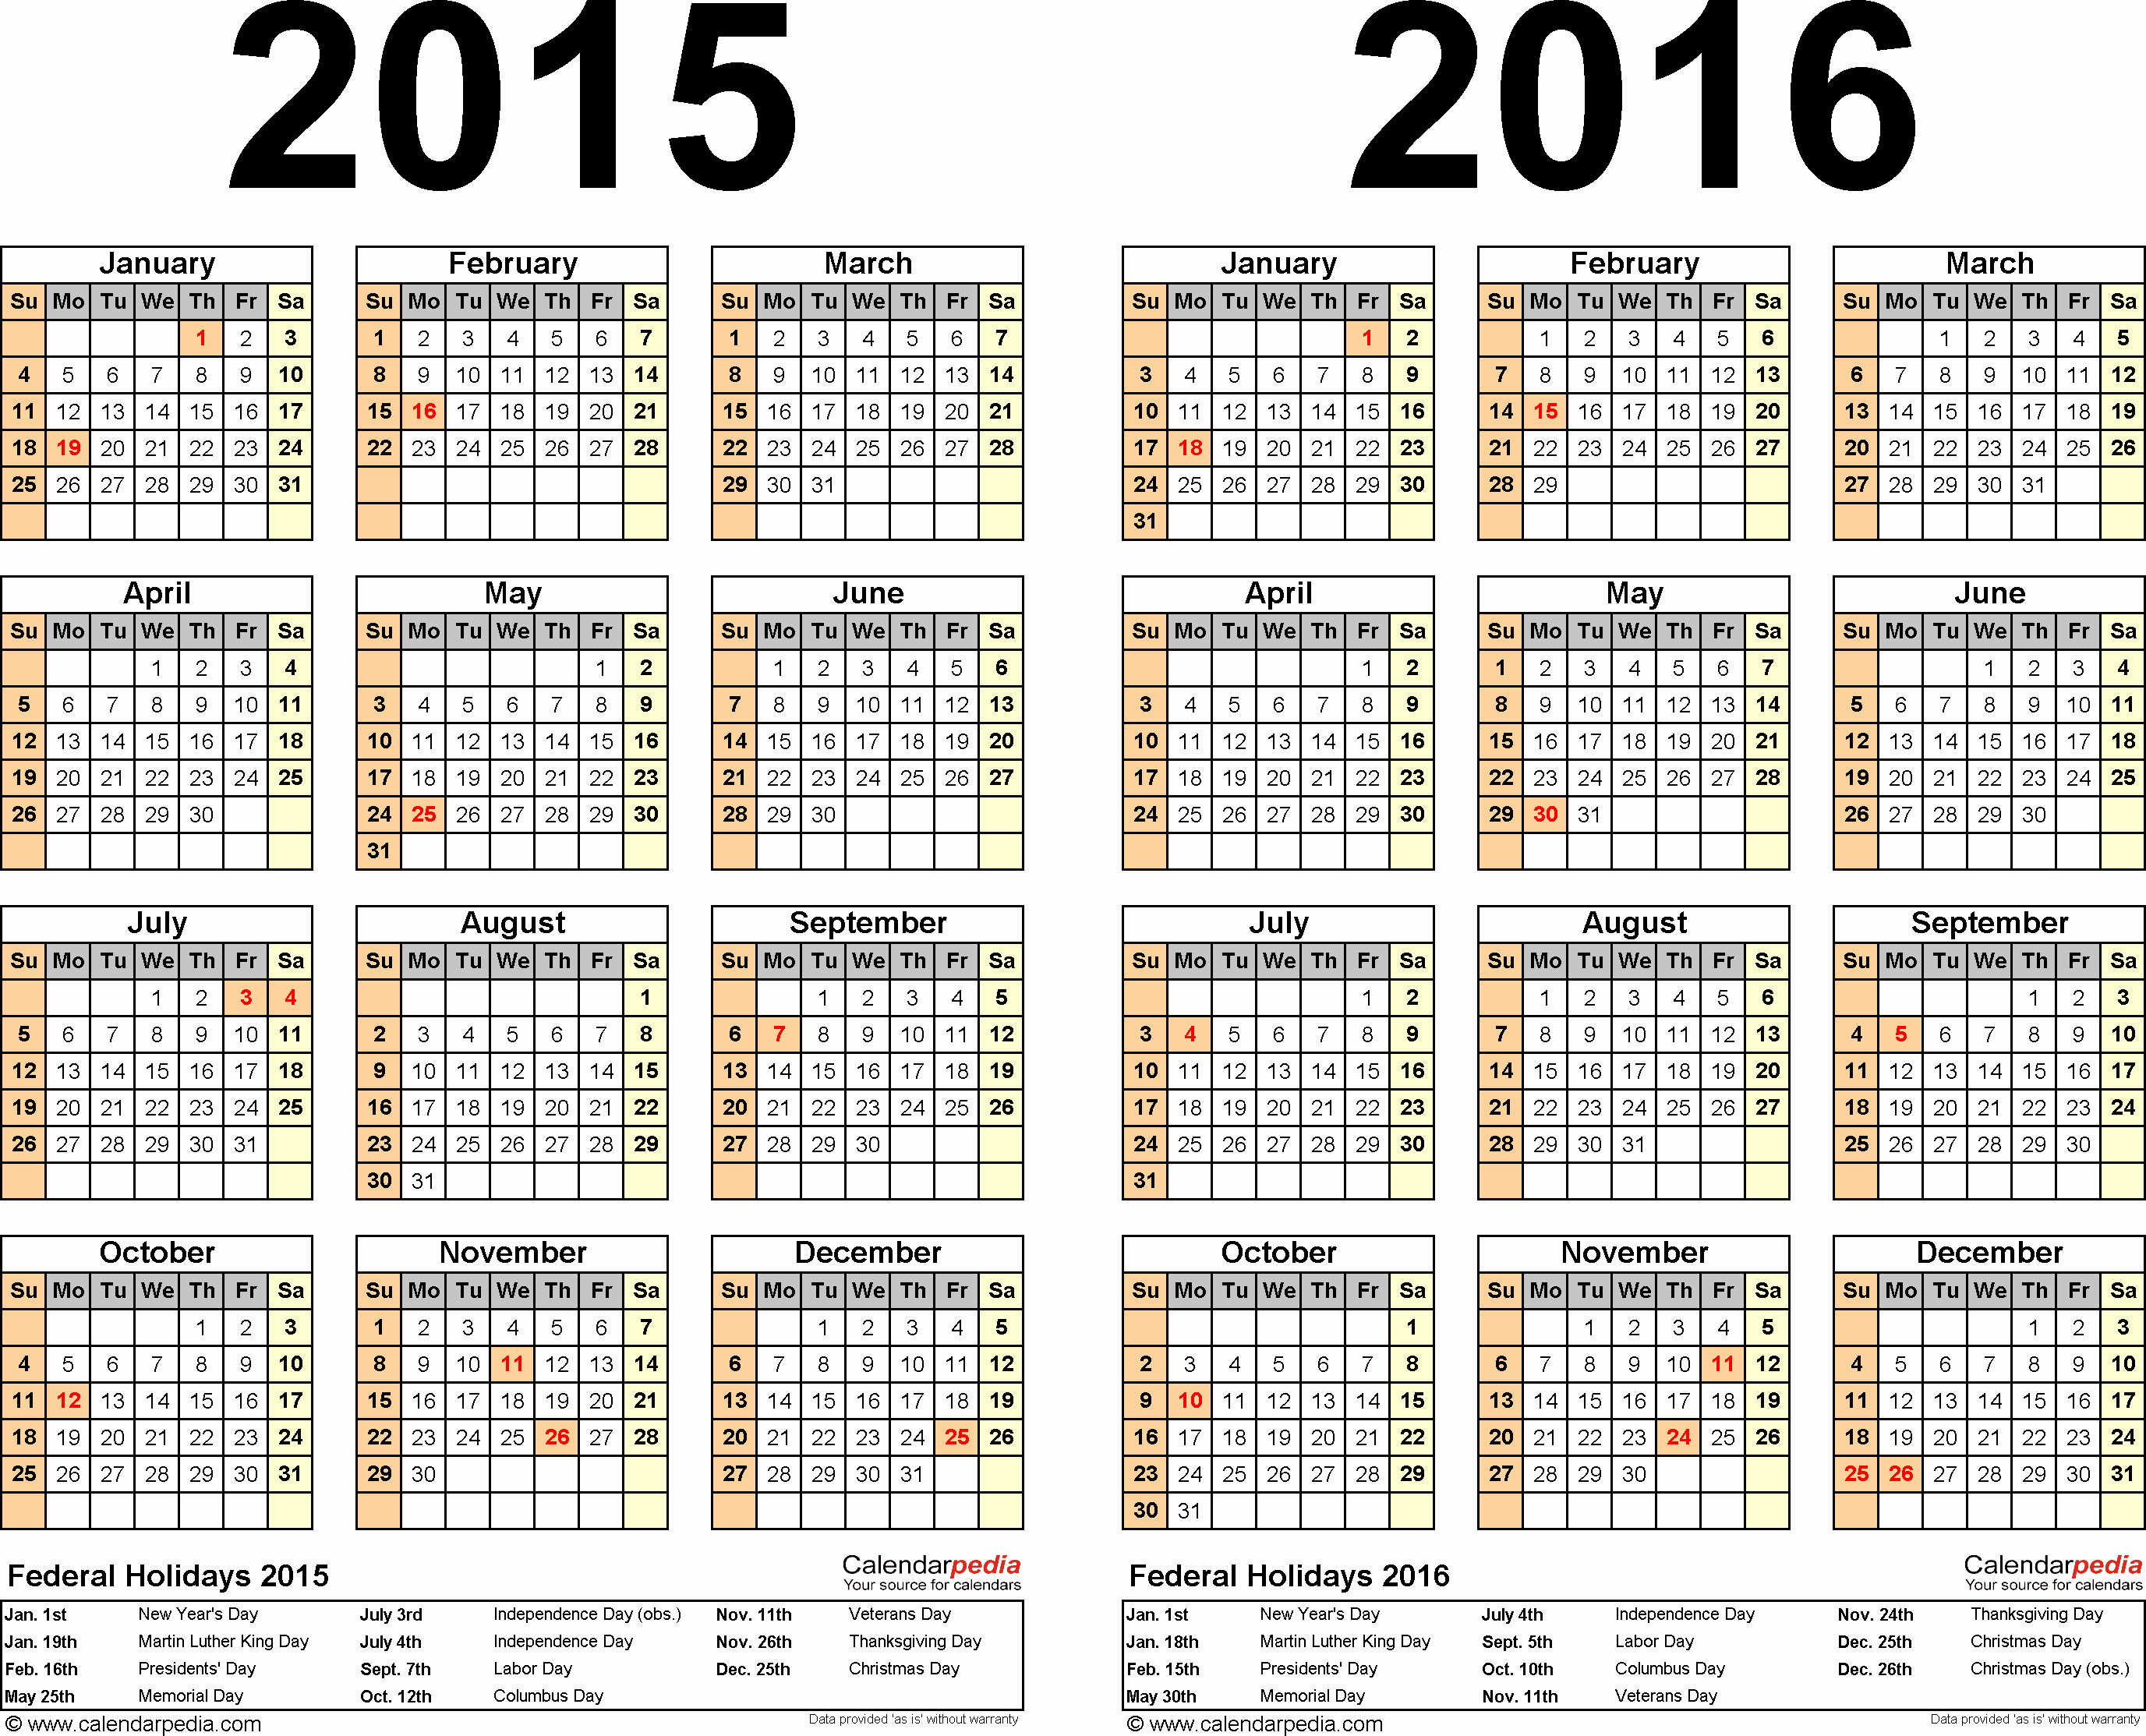 Fiscal Year Calendar 2016 Template Best Of 2015 2016 Calendar Free Printable Two Year Excel Calendars